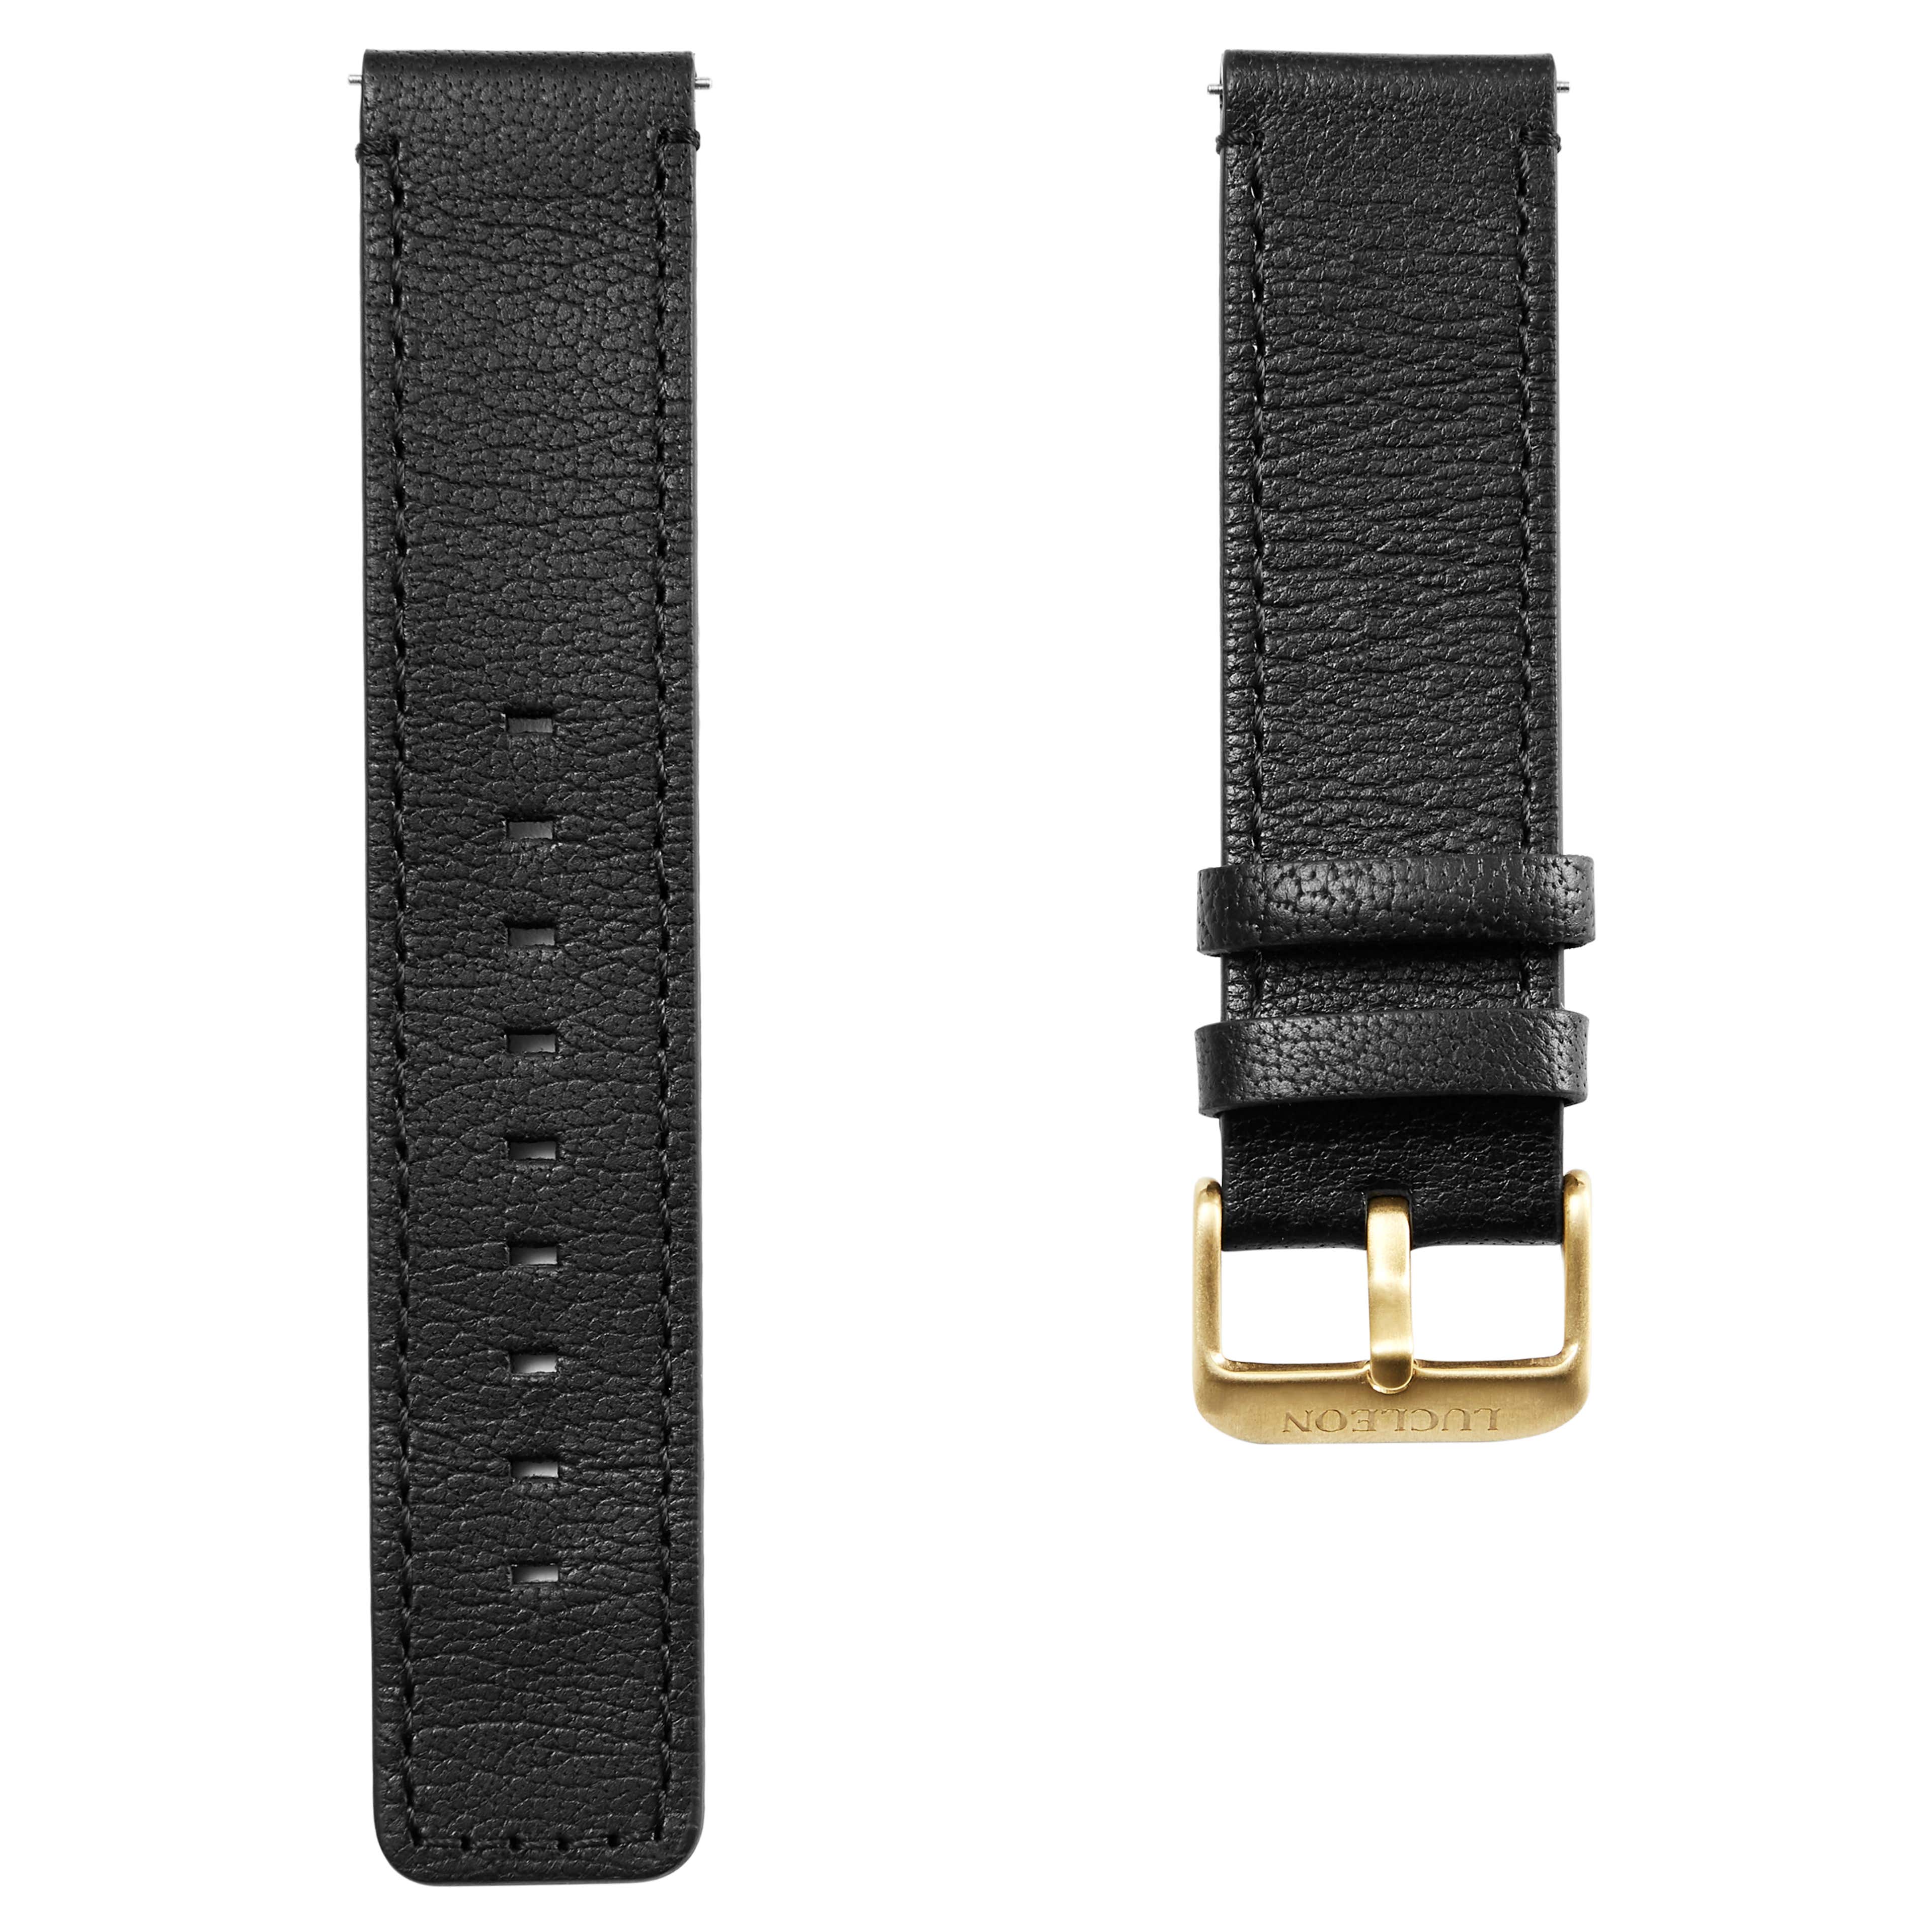 Black Leather Watch Strap with Gold-Tone Buckle